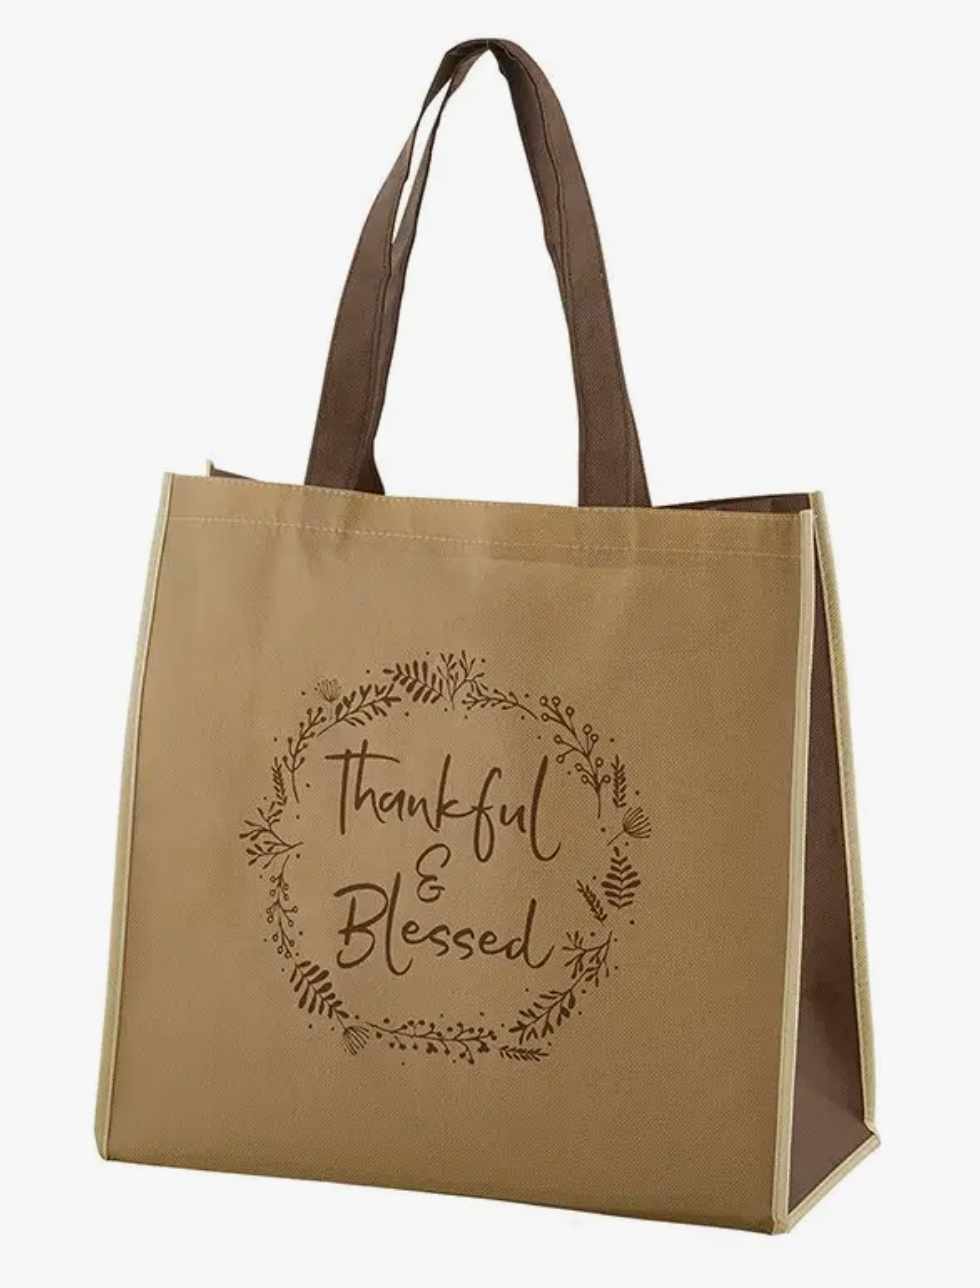 Thankful-Blessed Tote